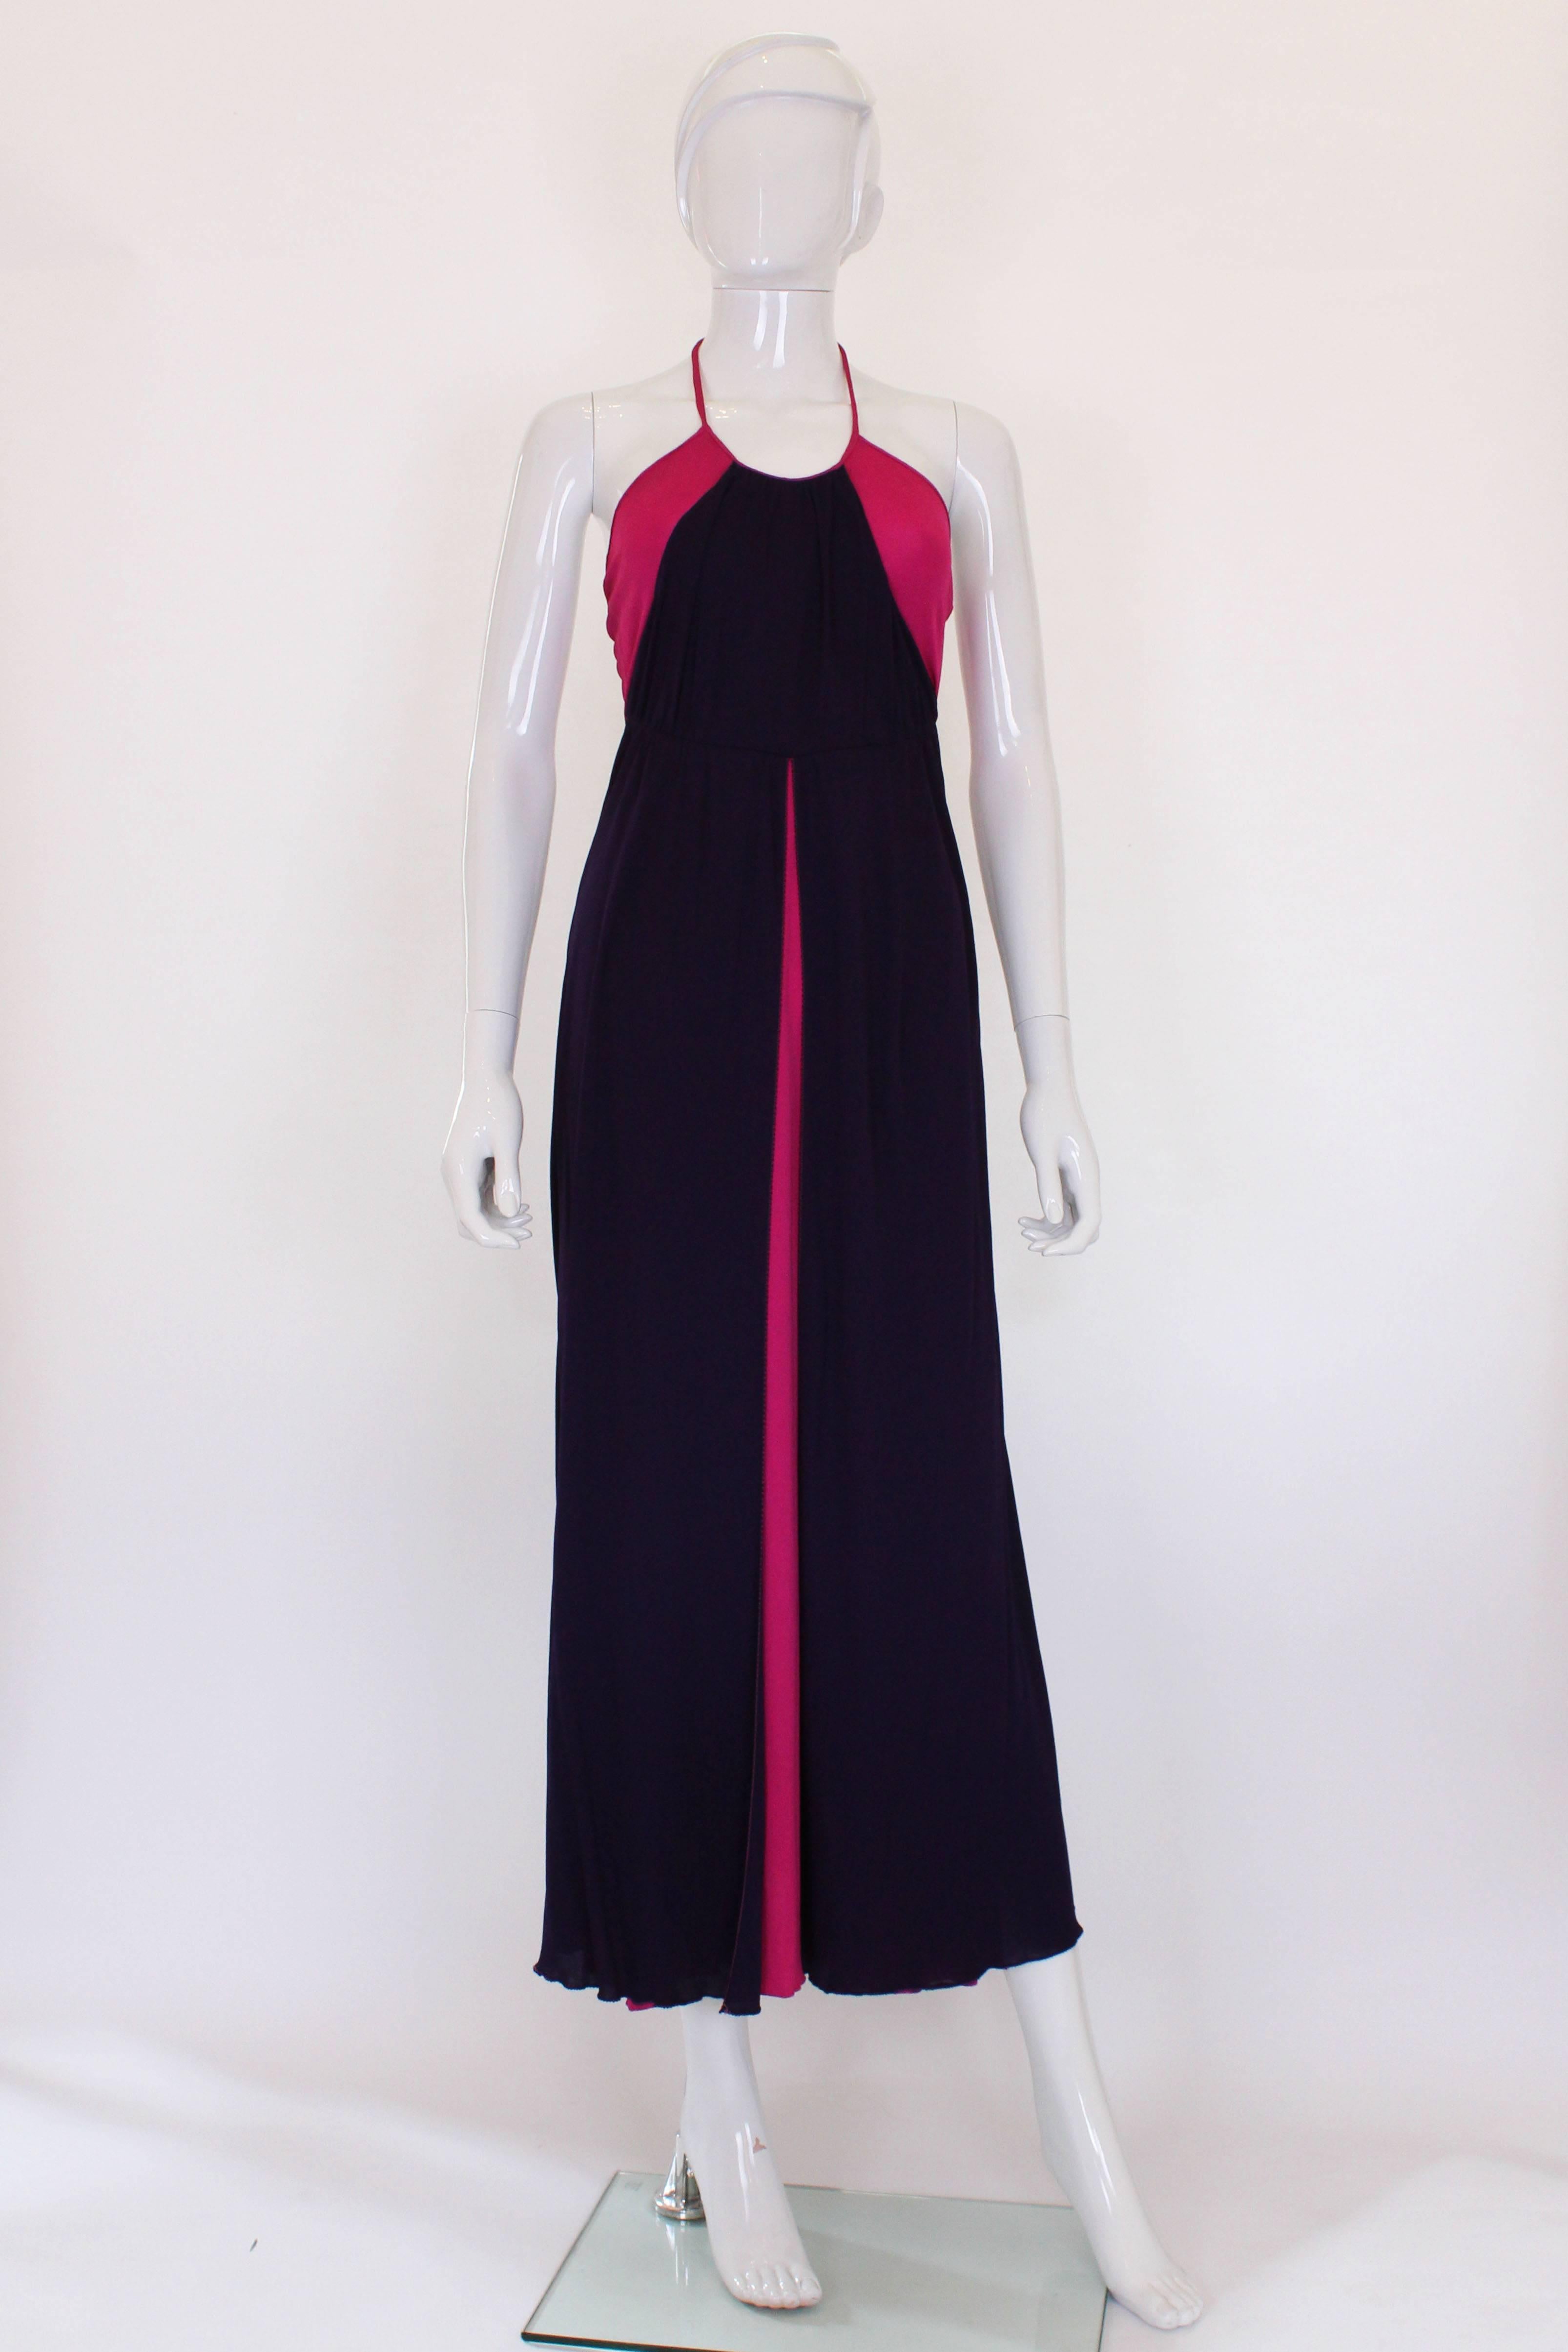 A glamorous gown from the 1970s by British designer Bruce Oldfield.
In a stunning colour clash of bright pink and deep purple,this gown is a real head turner. It has a halter neck ,and central back zip.The column dress is bright pink with a deep